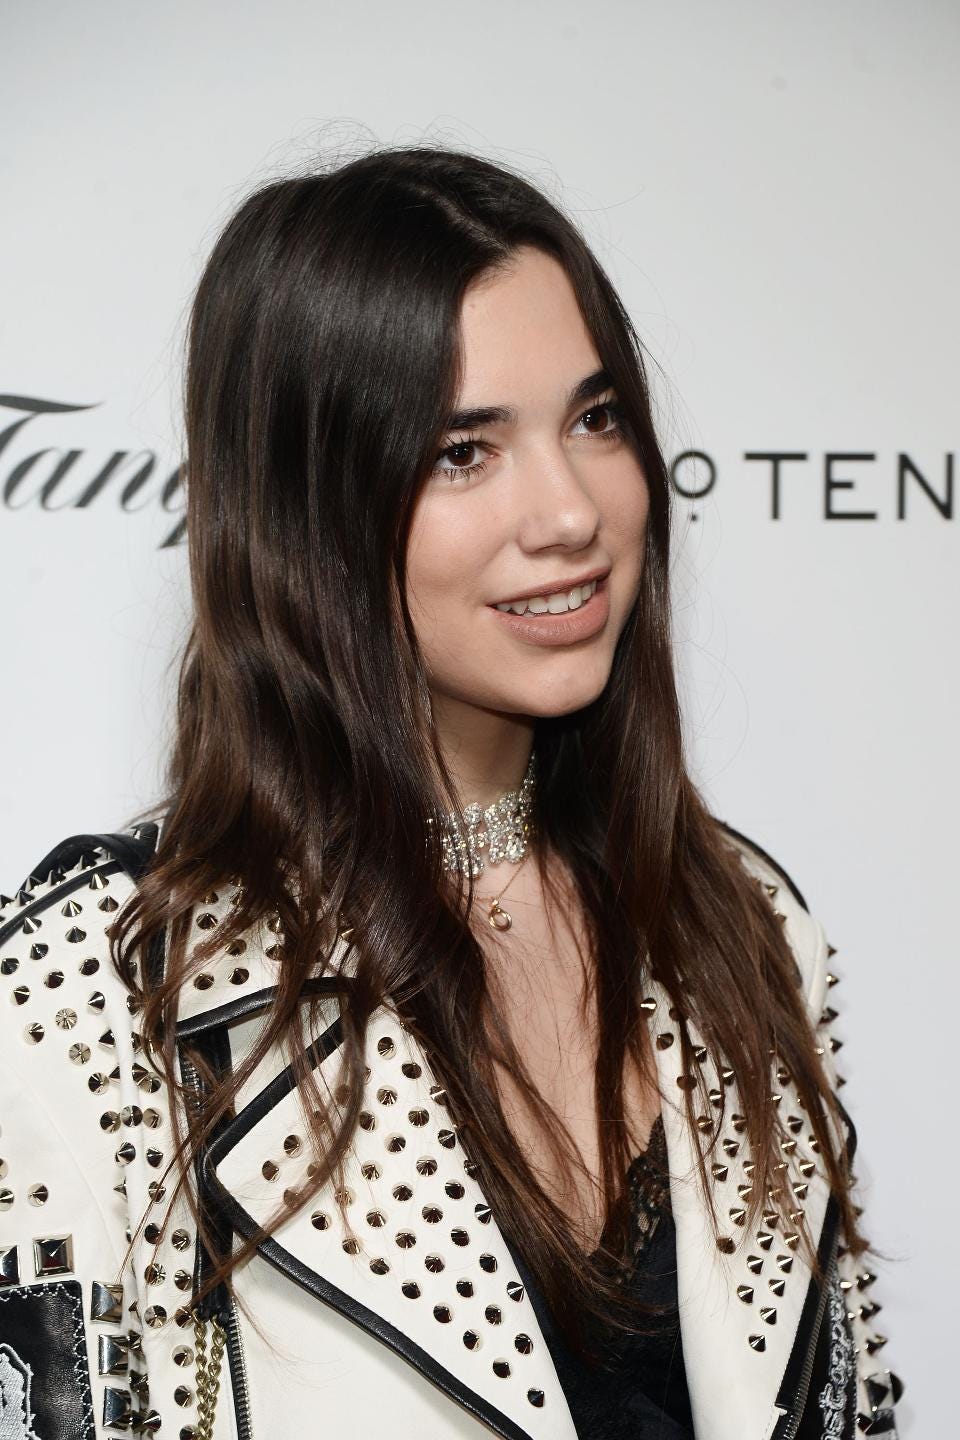 The modern world is crazy!' Why Dua Lipa doesn't want to be a mother yet